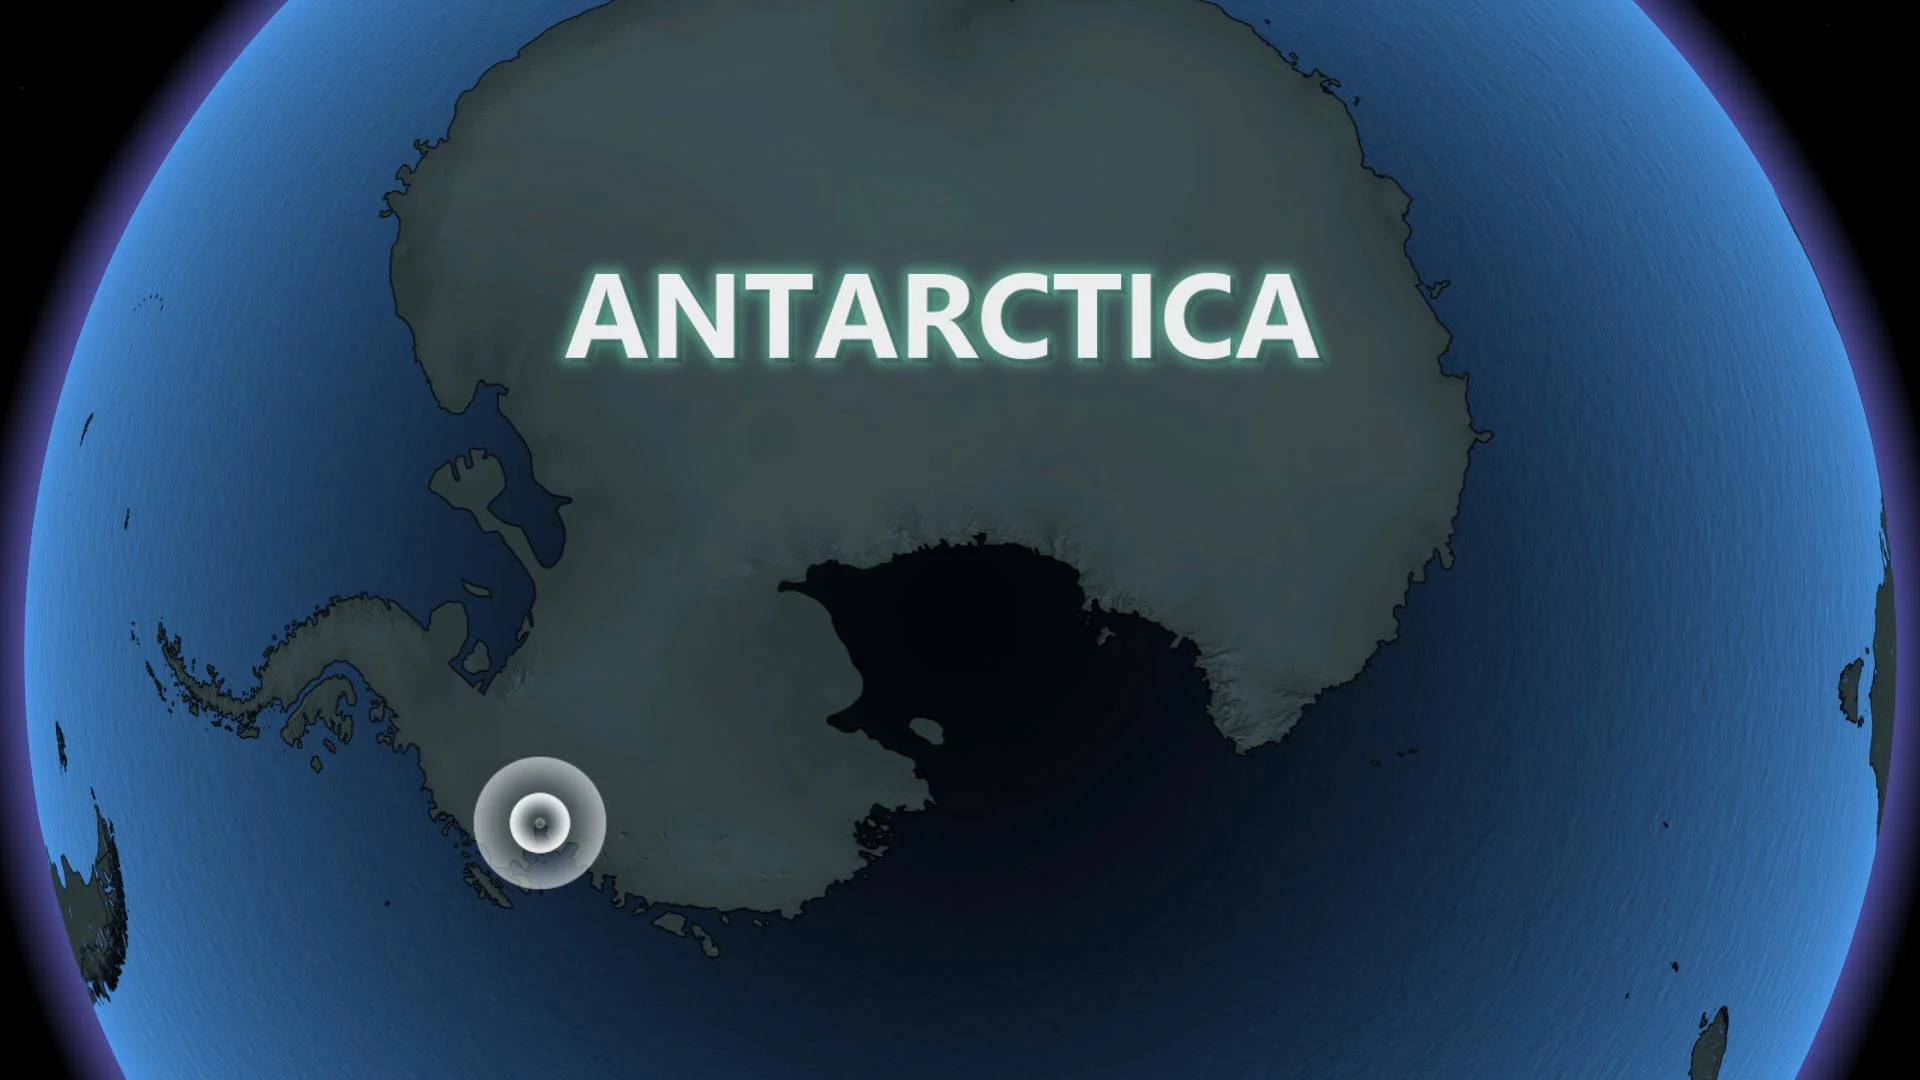 New uncharted island revealed by melting Antarctic ice